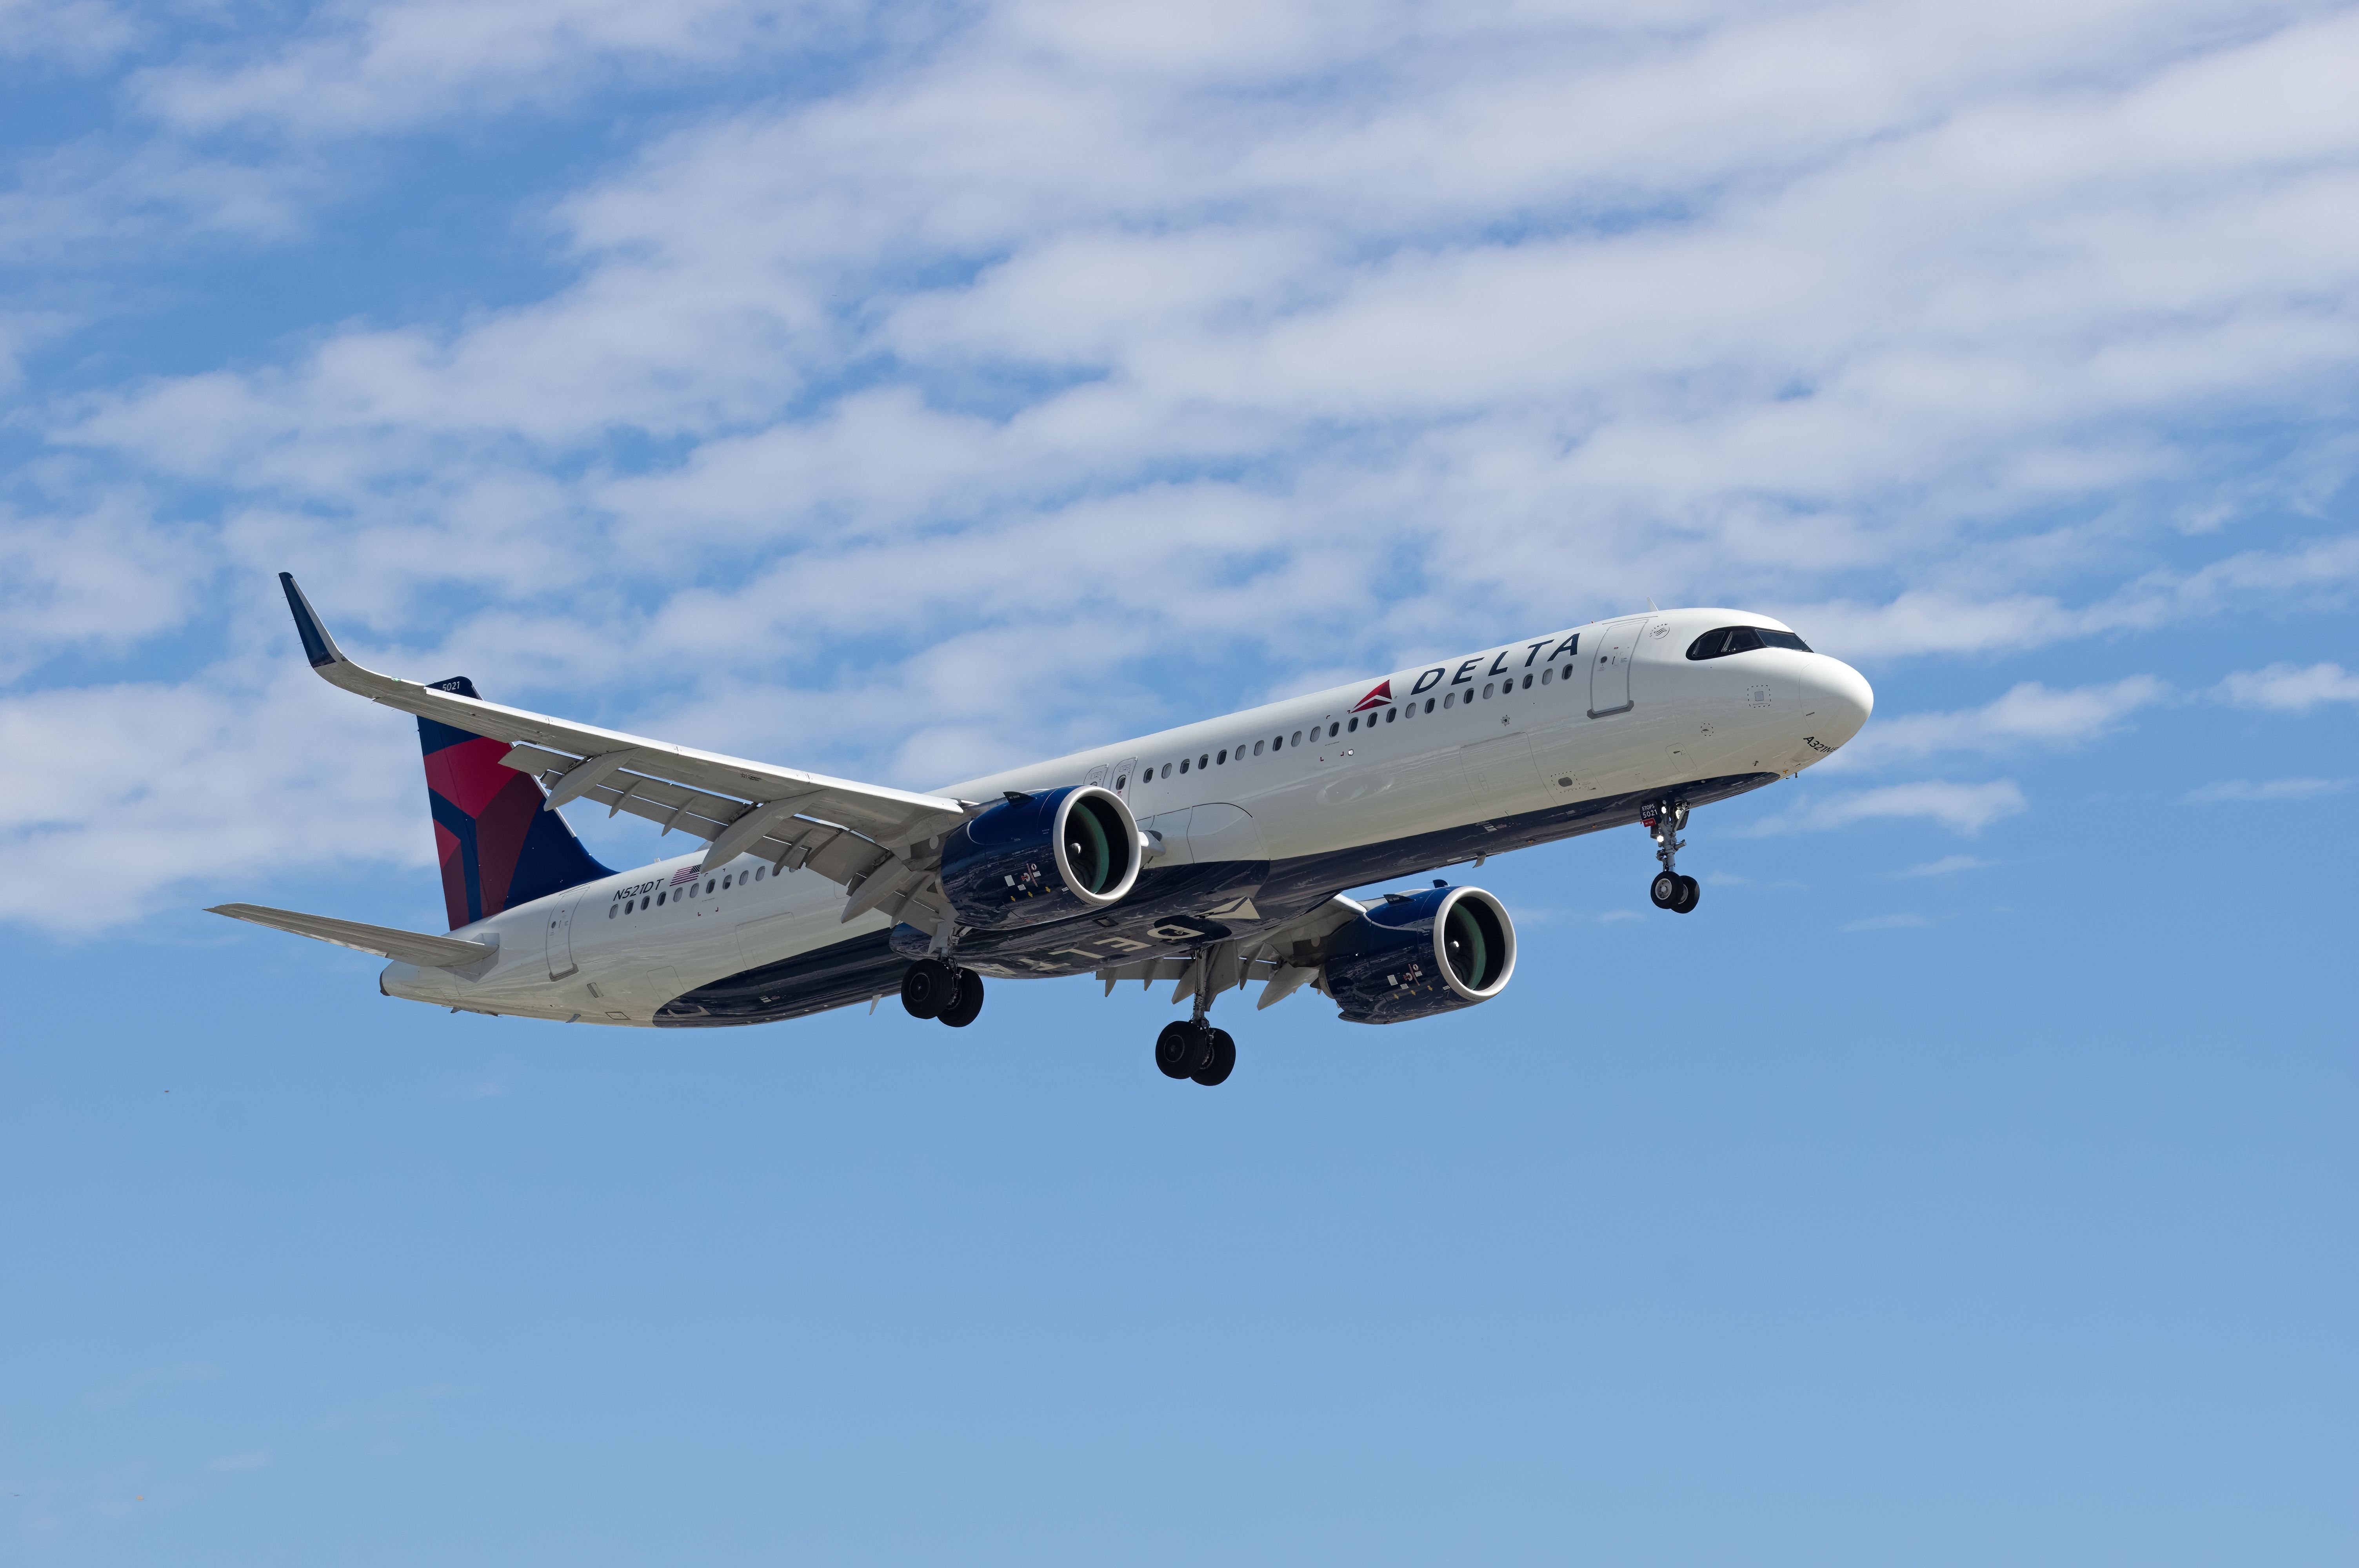 A Delta Air Lines Airbus A321neo flying in the sky.